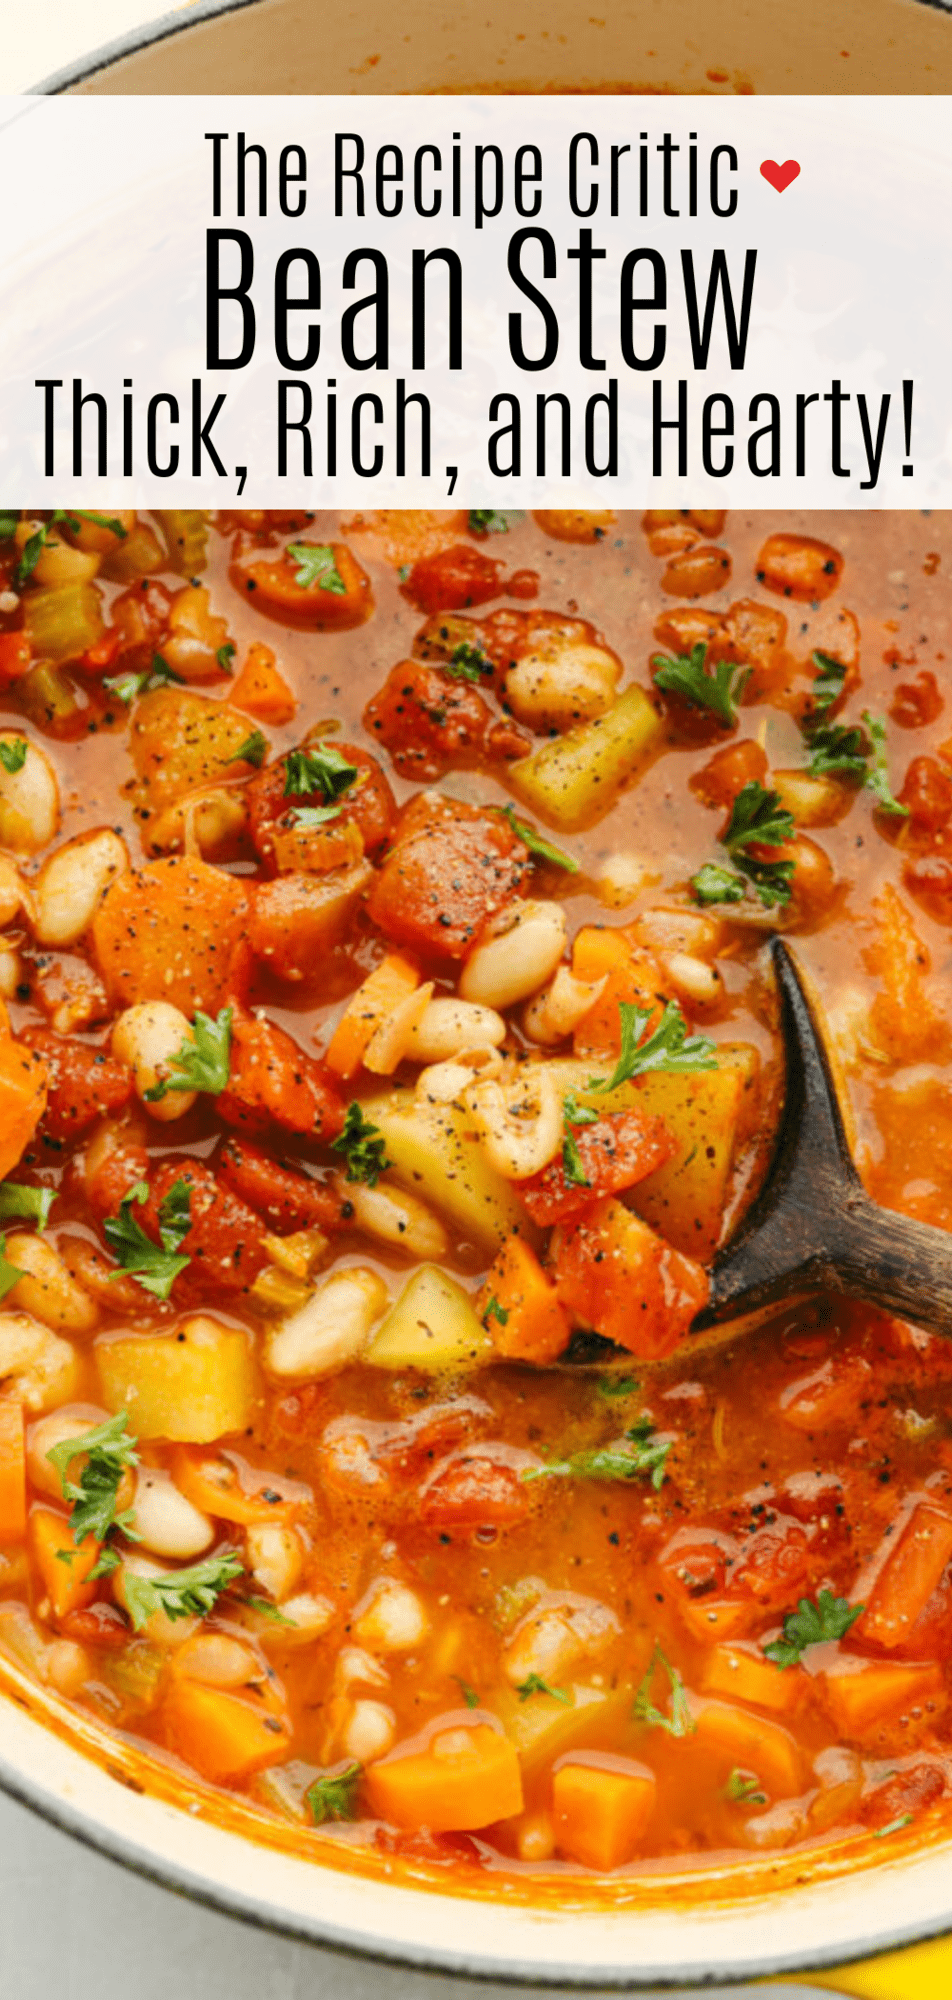 Thick Rich and Hearty Bean Stew Recipe